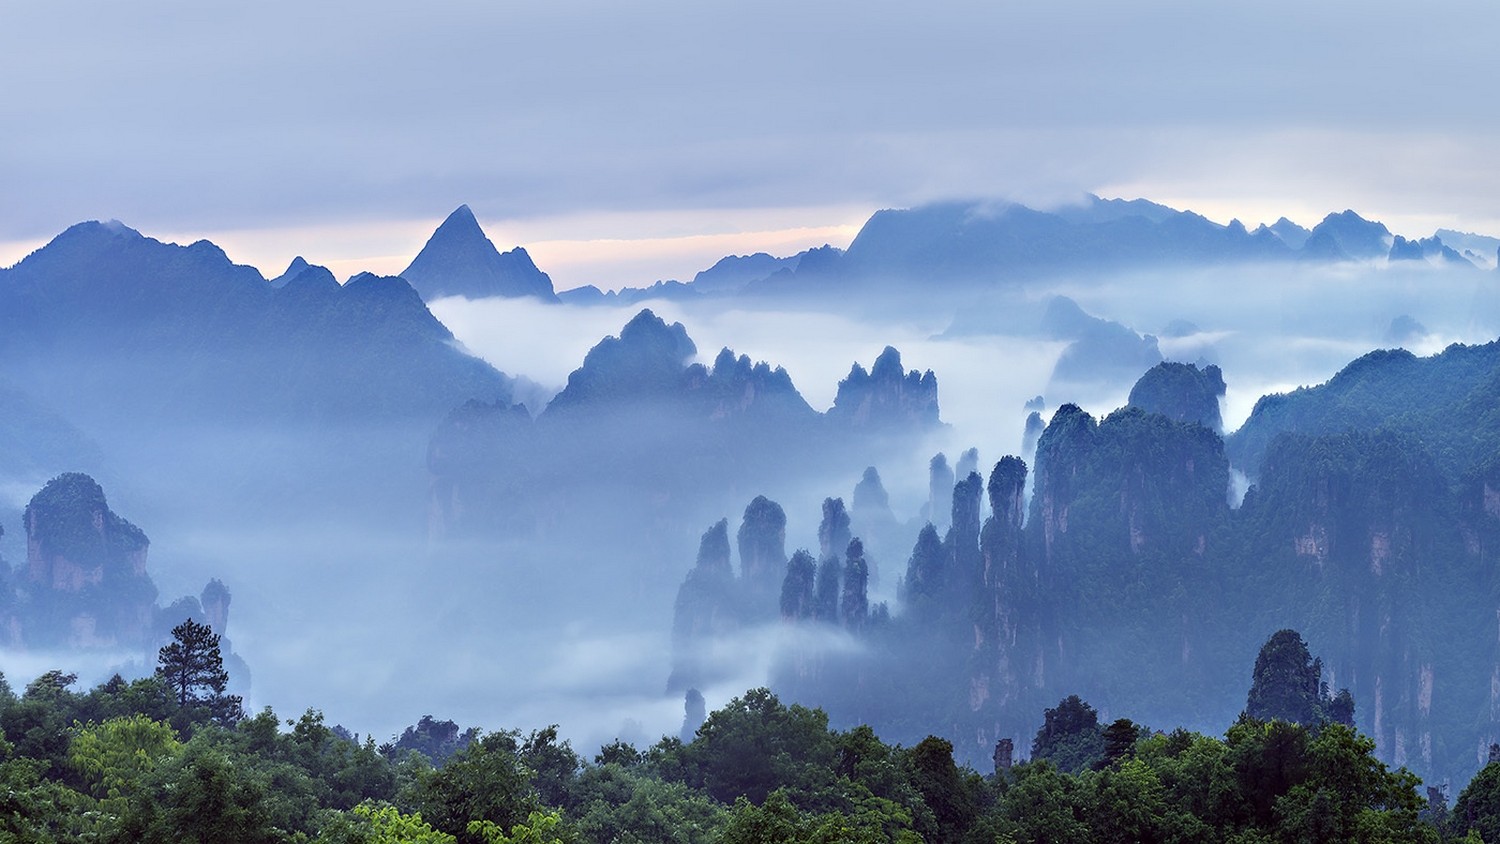 General 1500x844 nature landscape morning mist mountains forest clouds trees Guilin China Asia